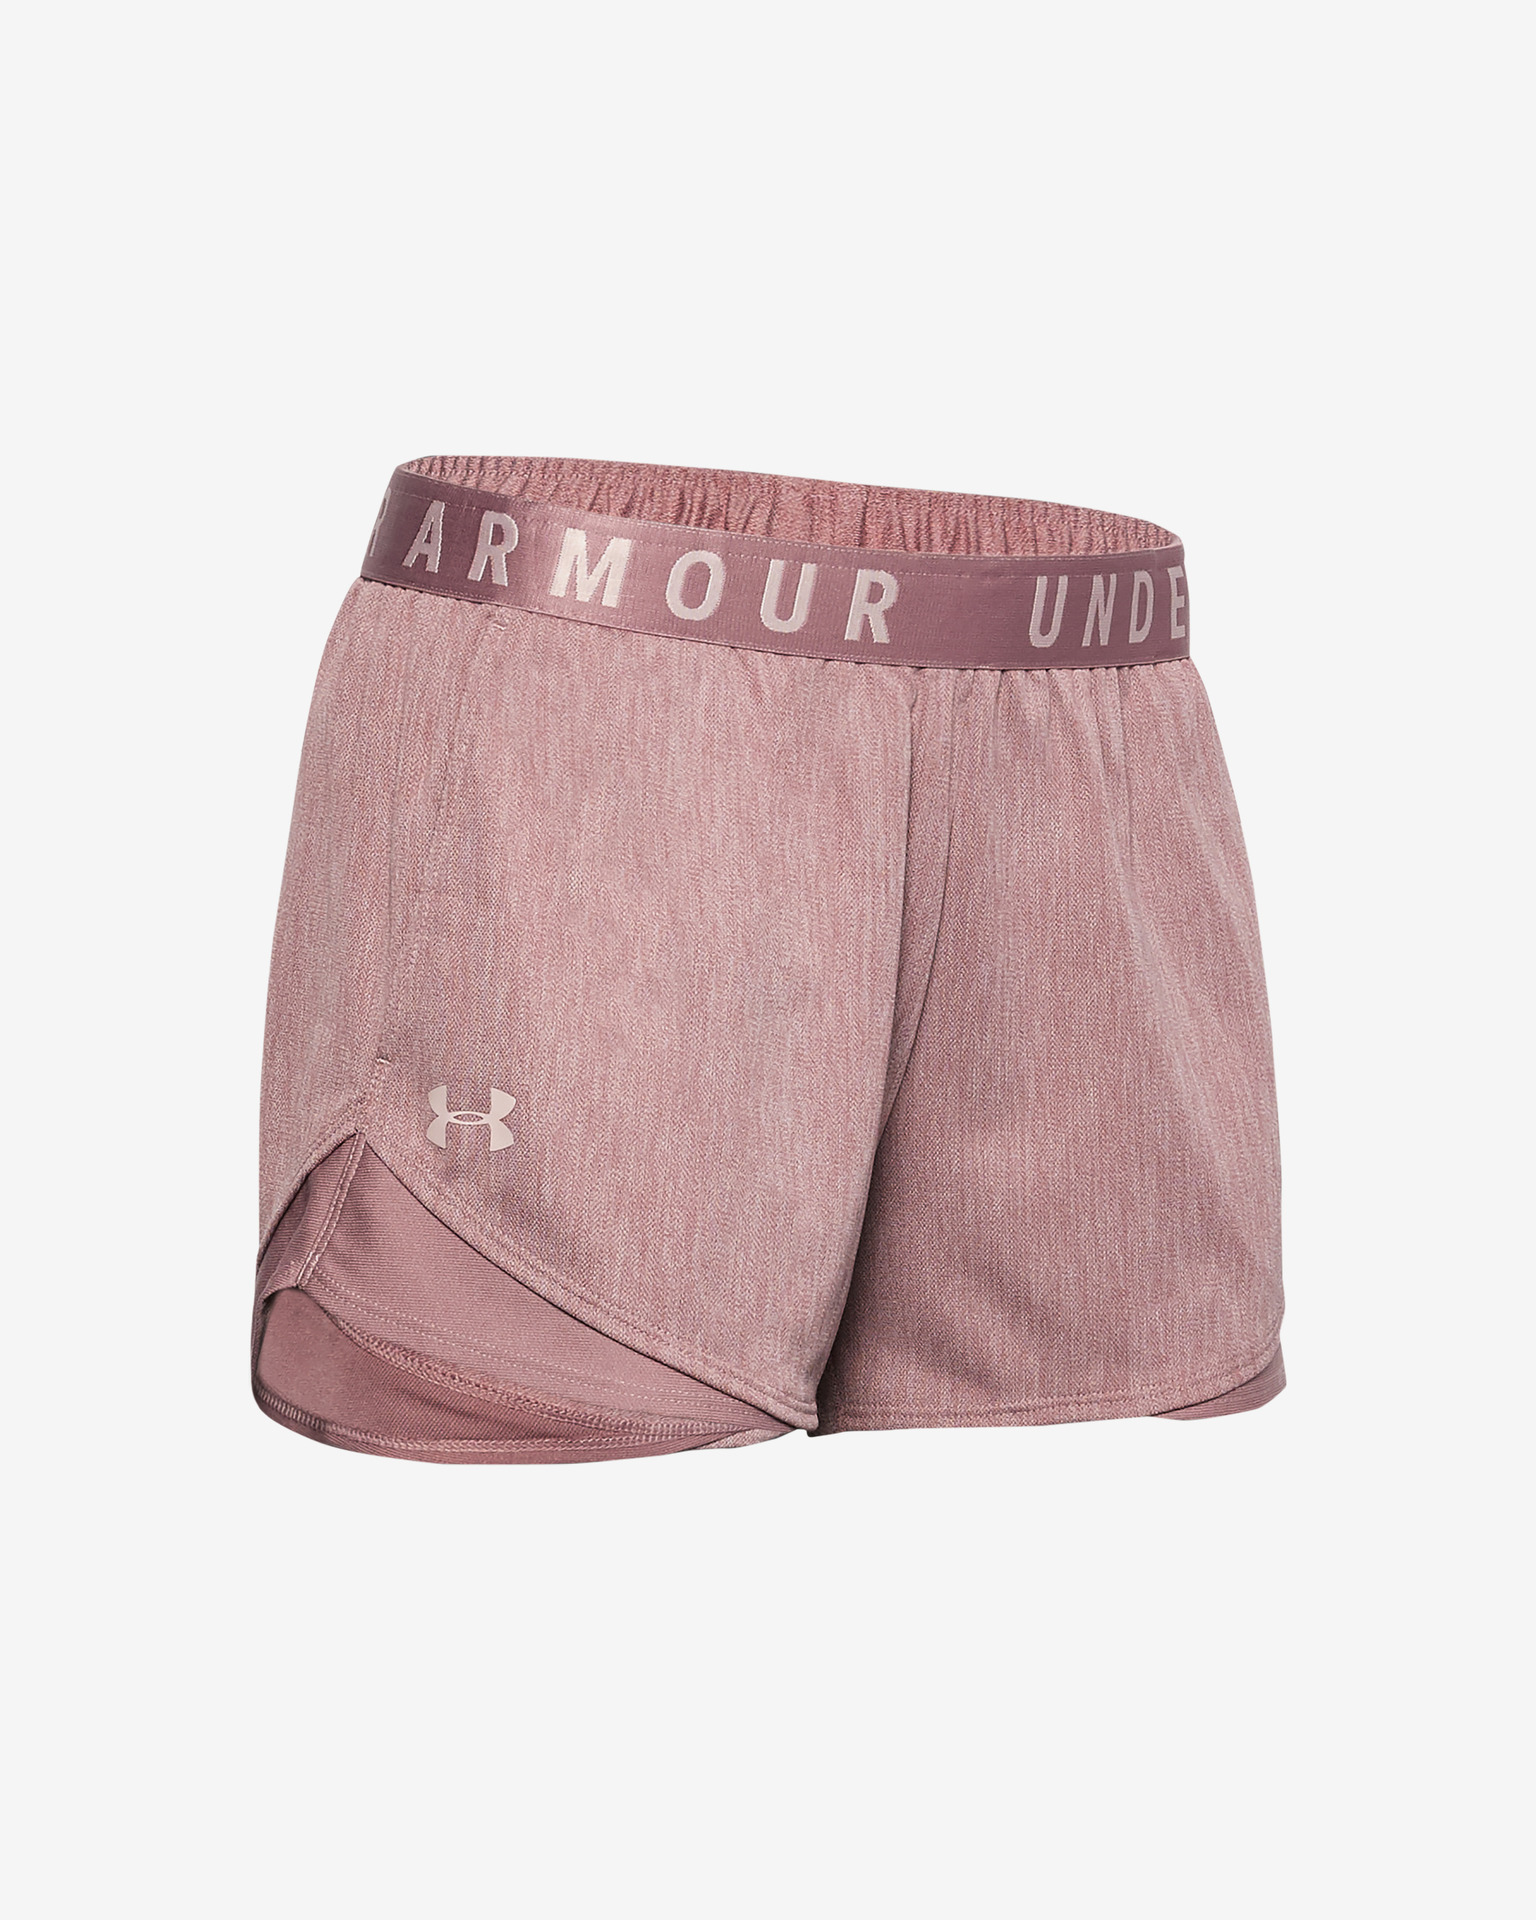 maroon under armour shorts